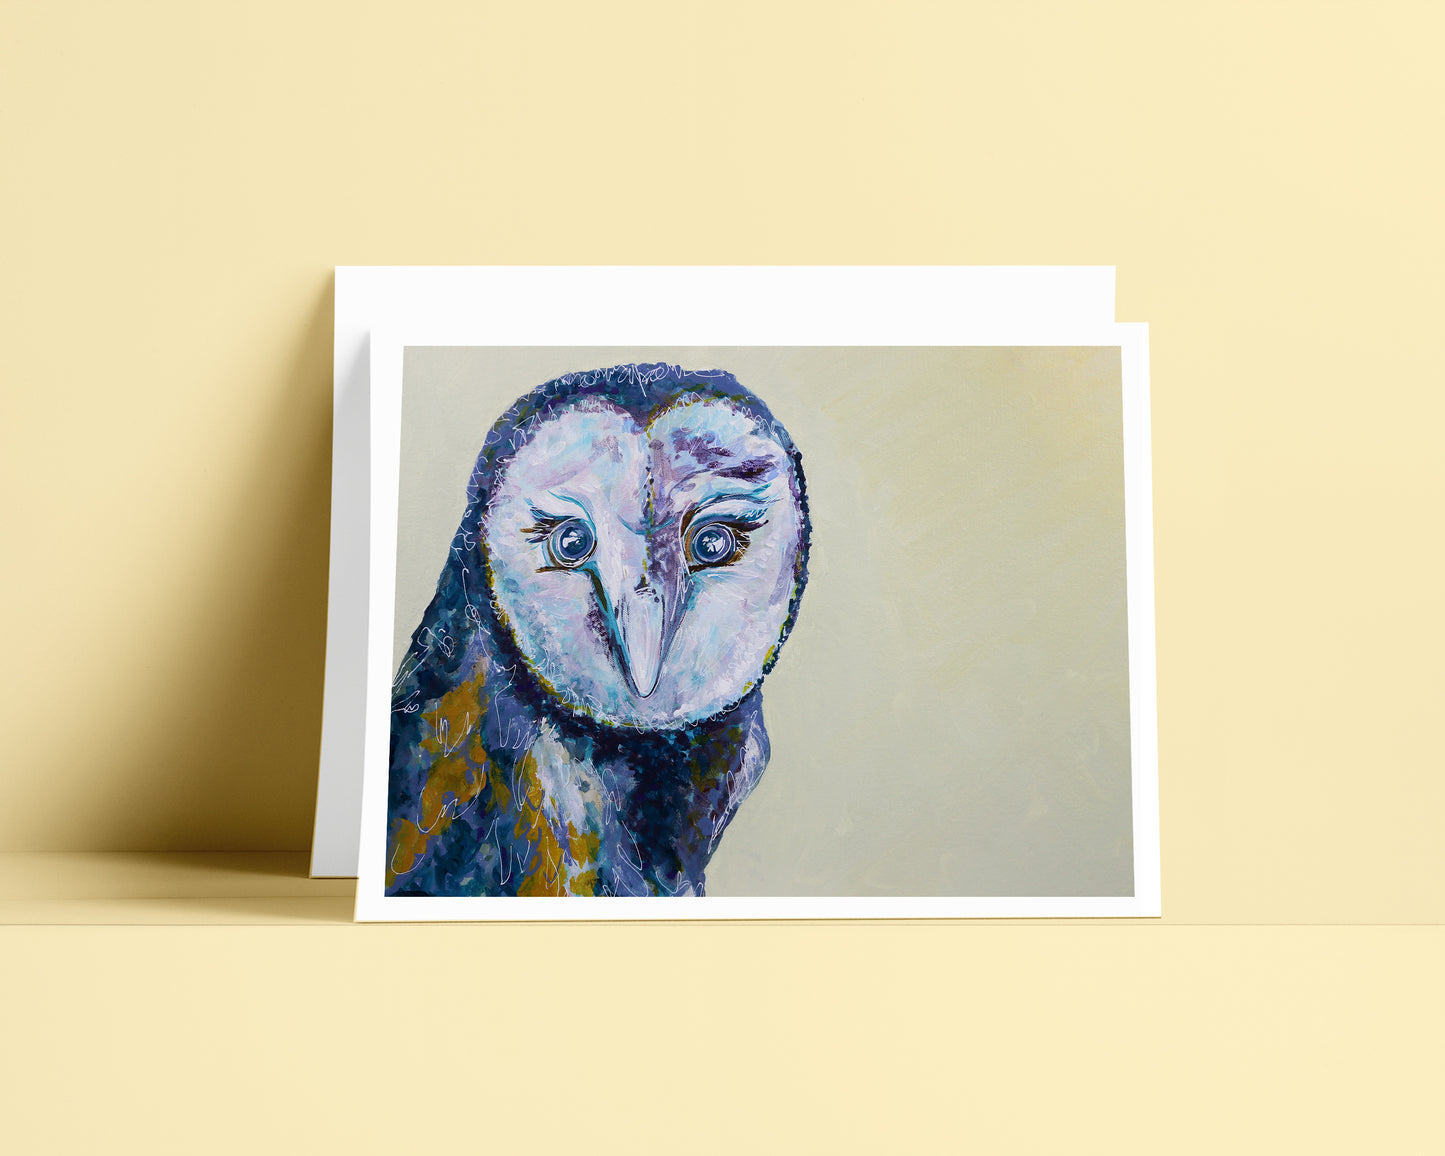 "Spirit Animal" Greeting Cards Gift Set (Includes 6 Cards and Envelopes)